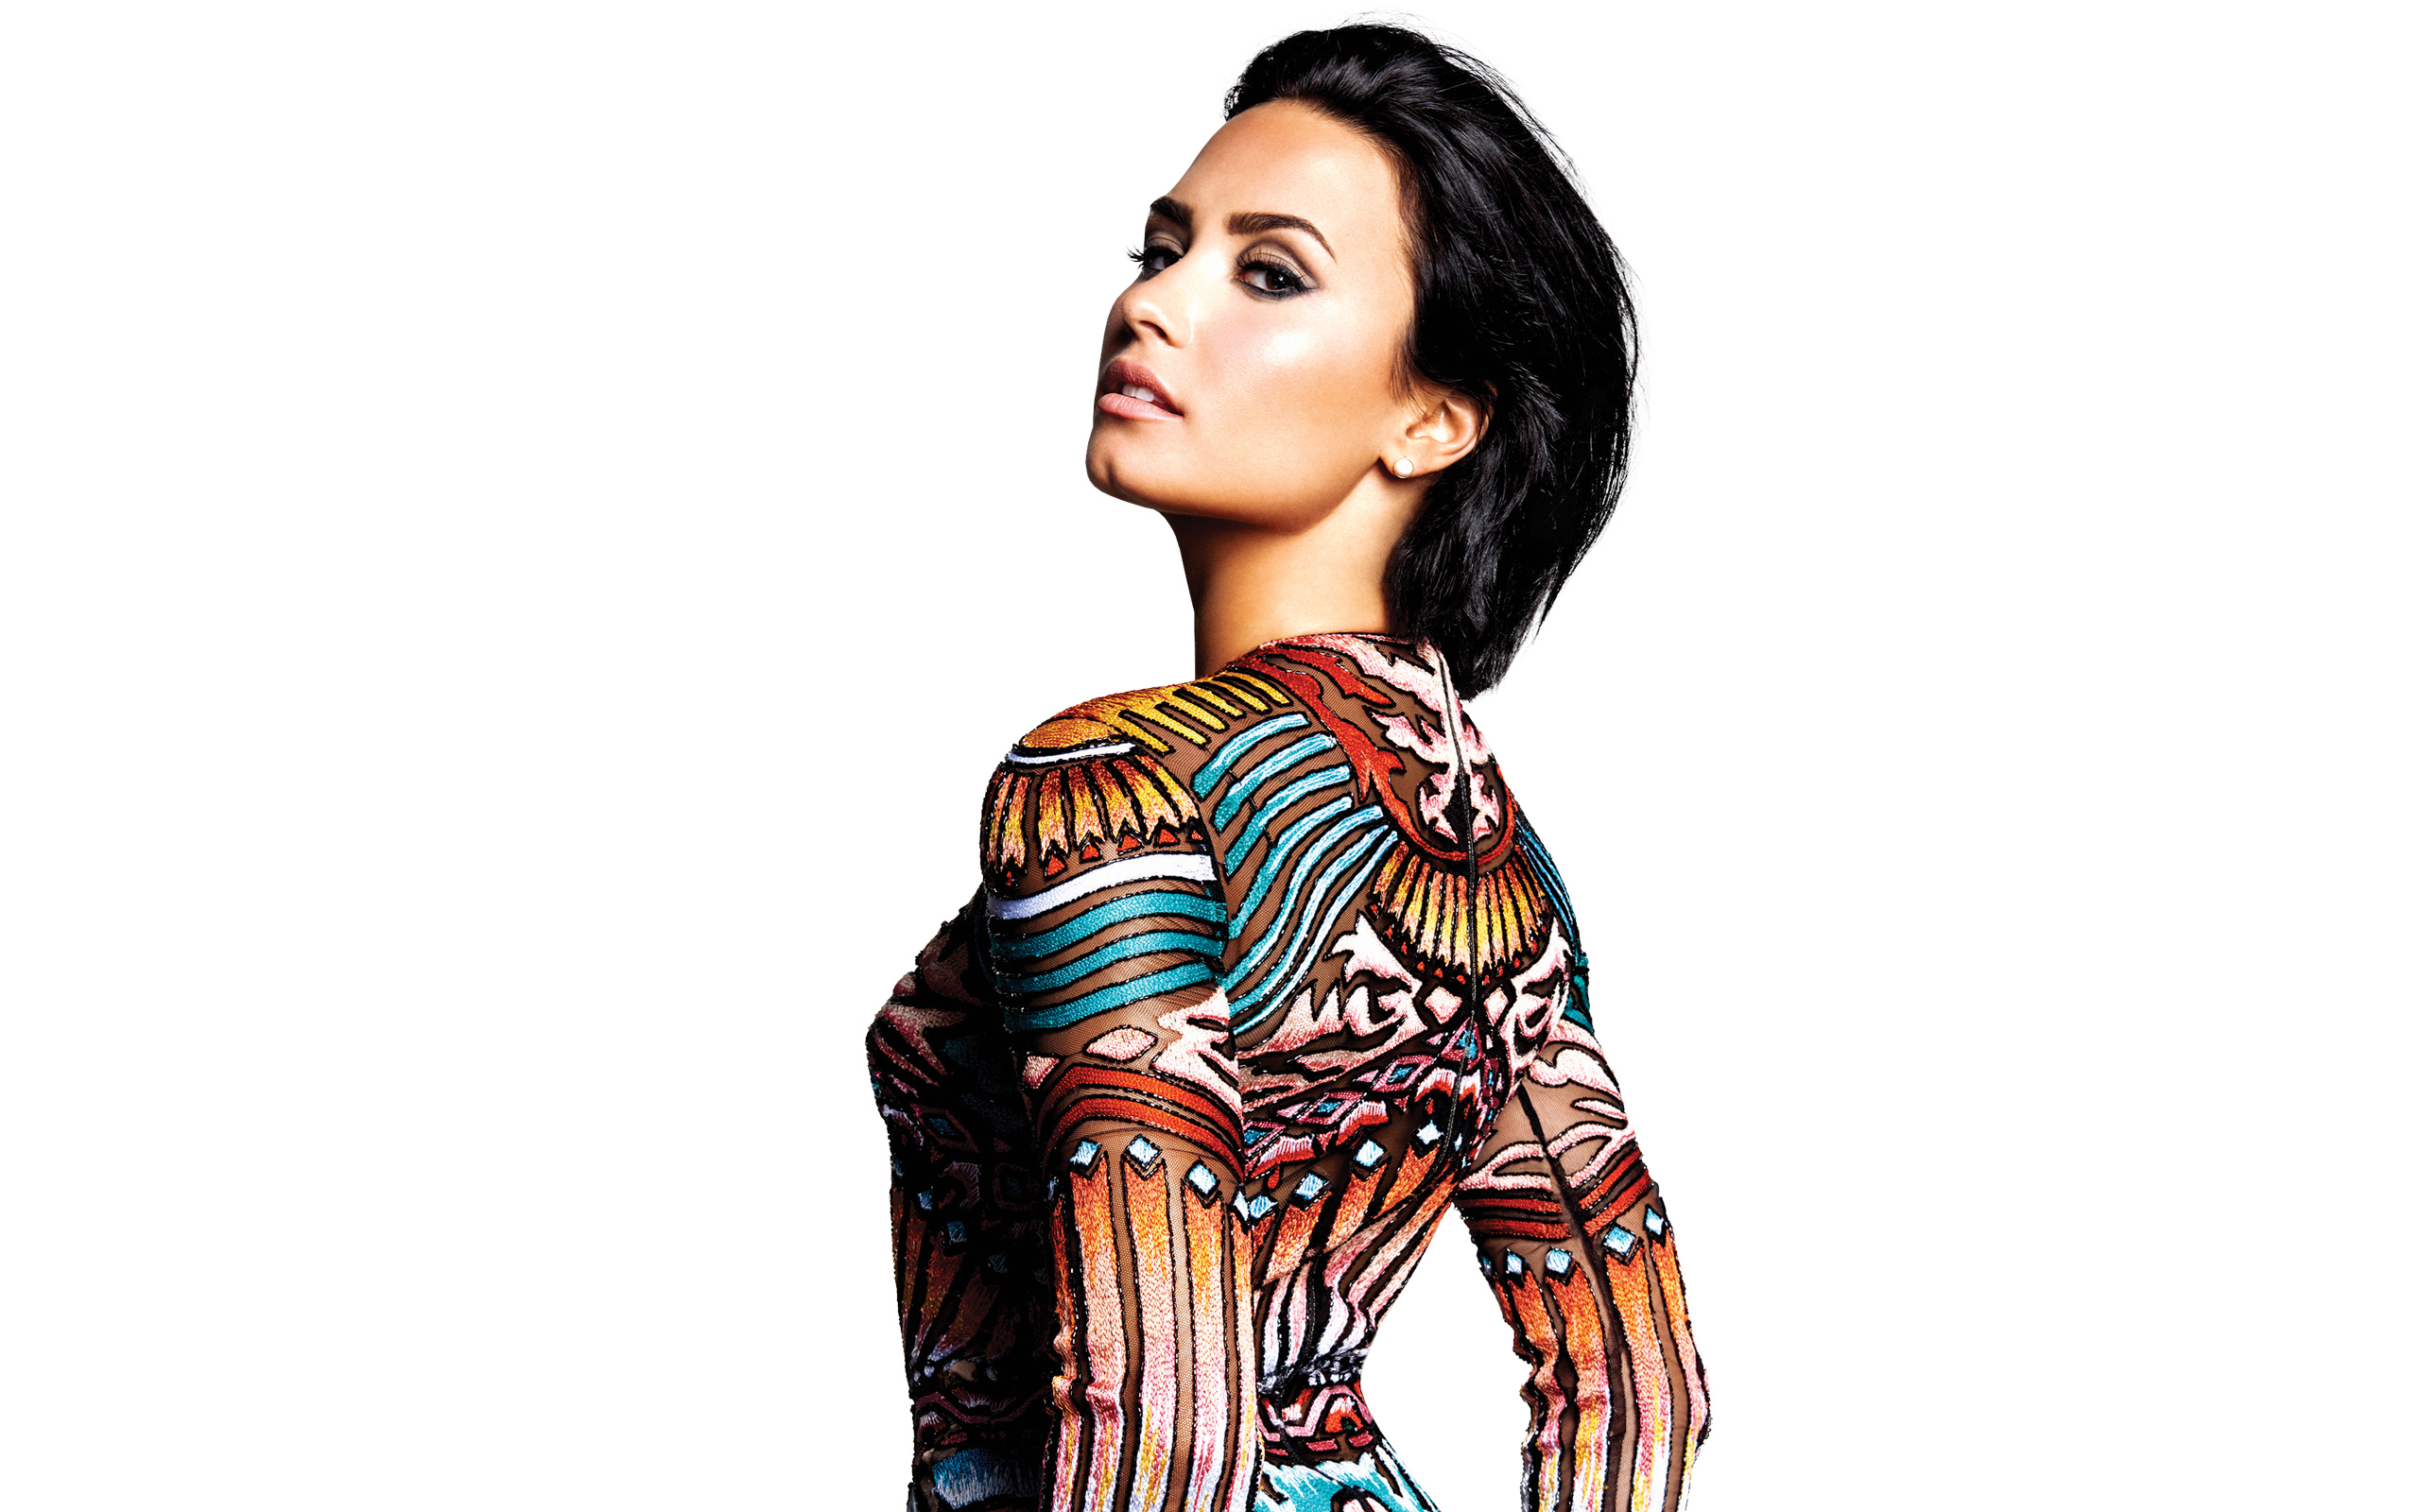 Demi Lovato Confident 2015 Wallpapers HD Wallpapers